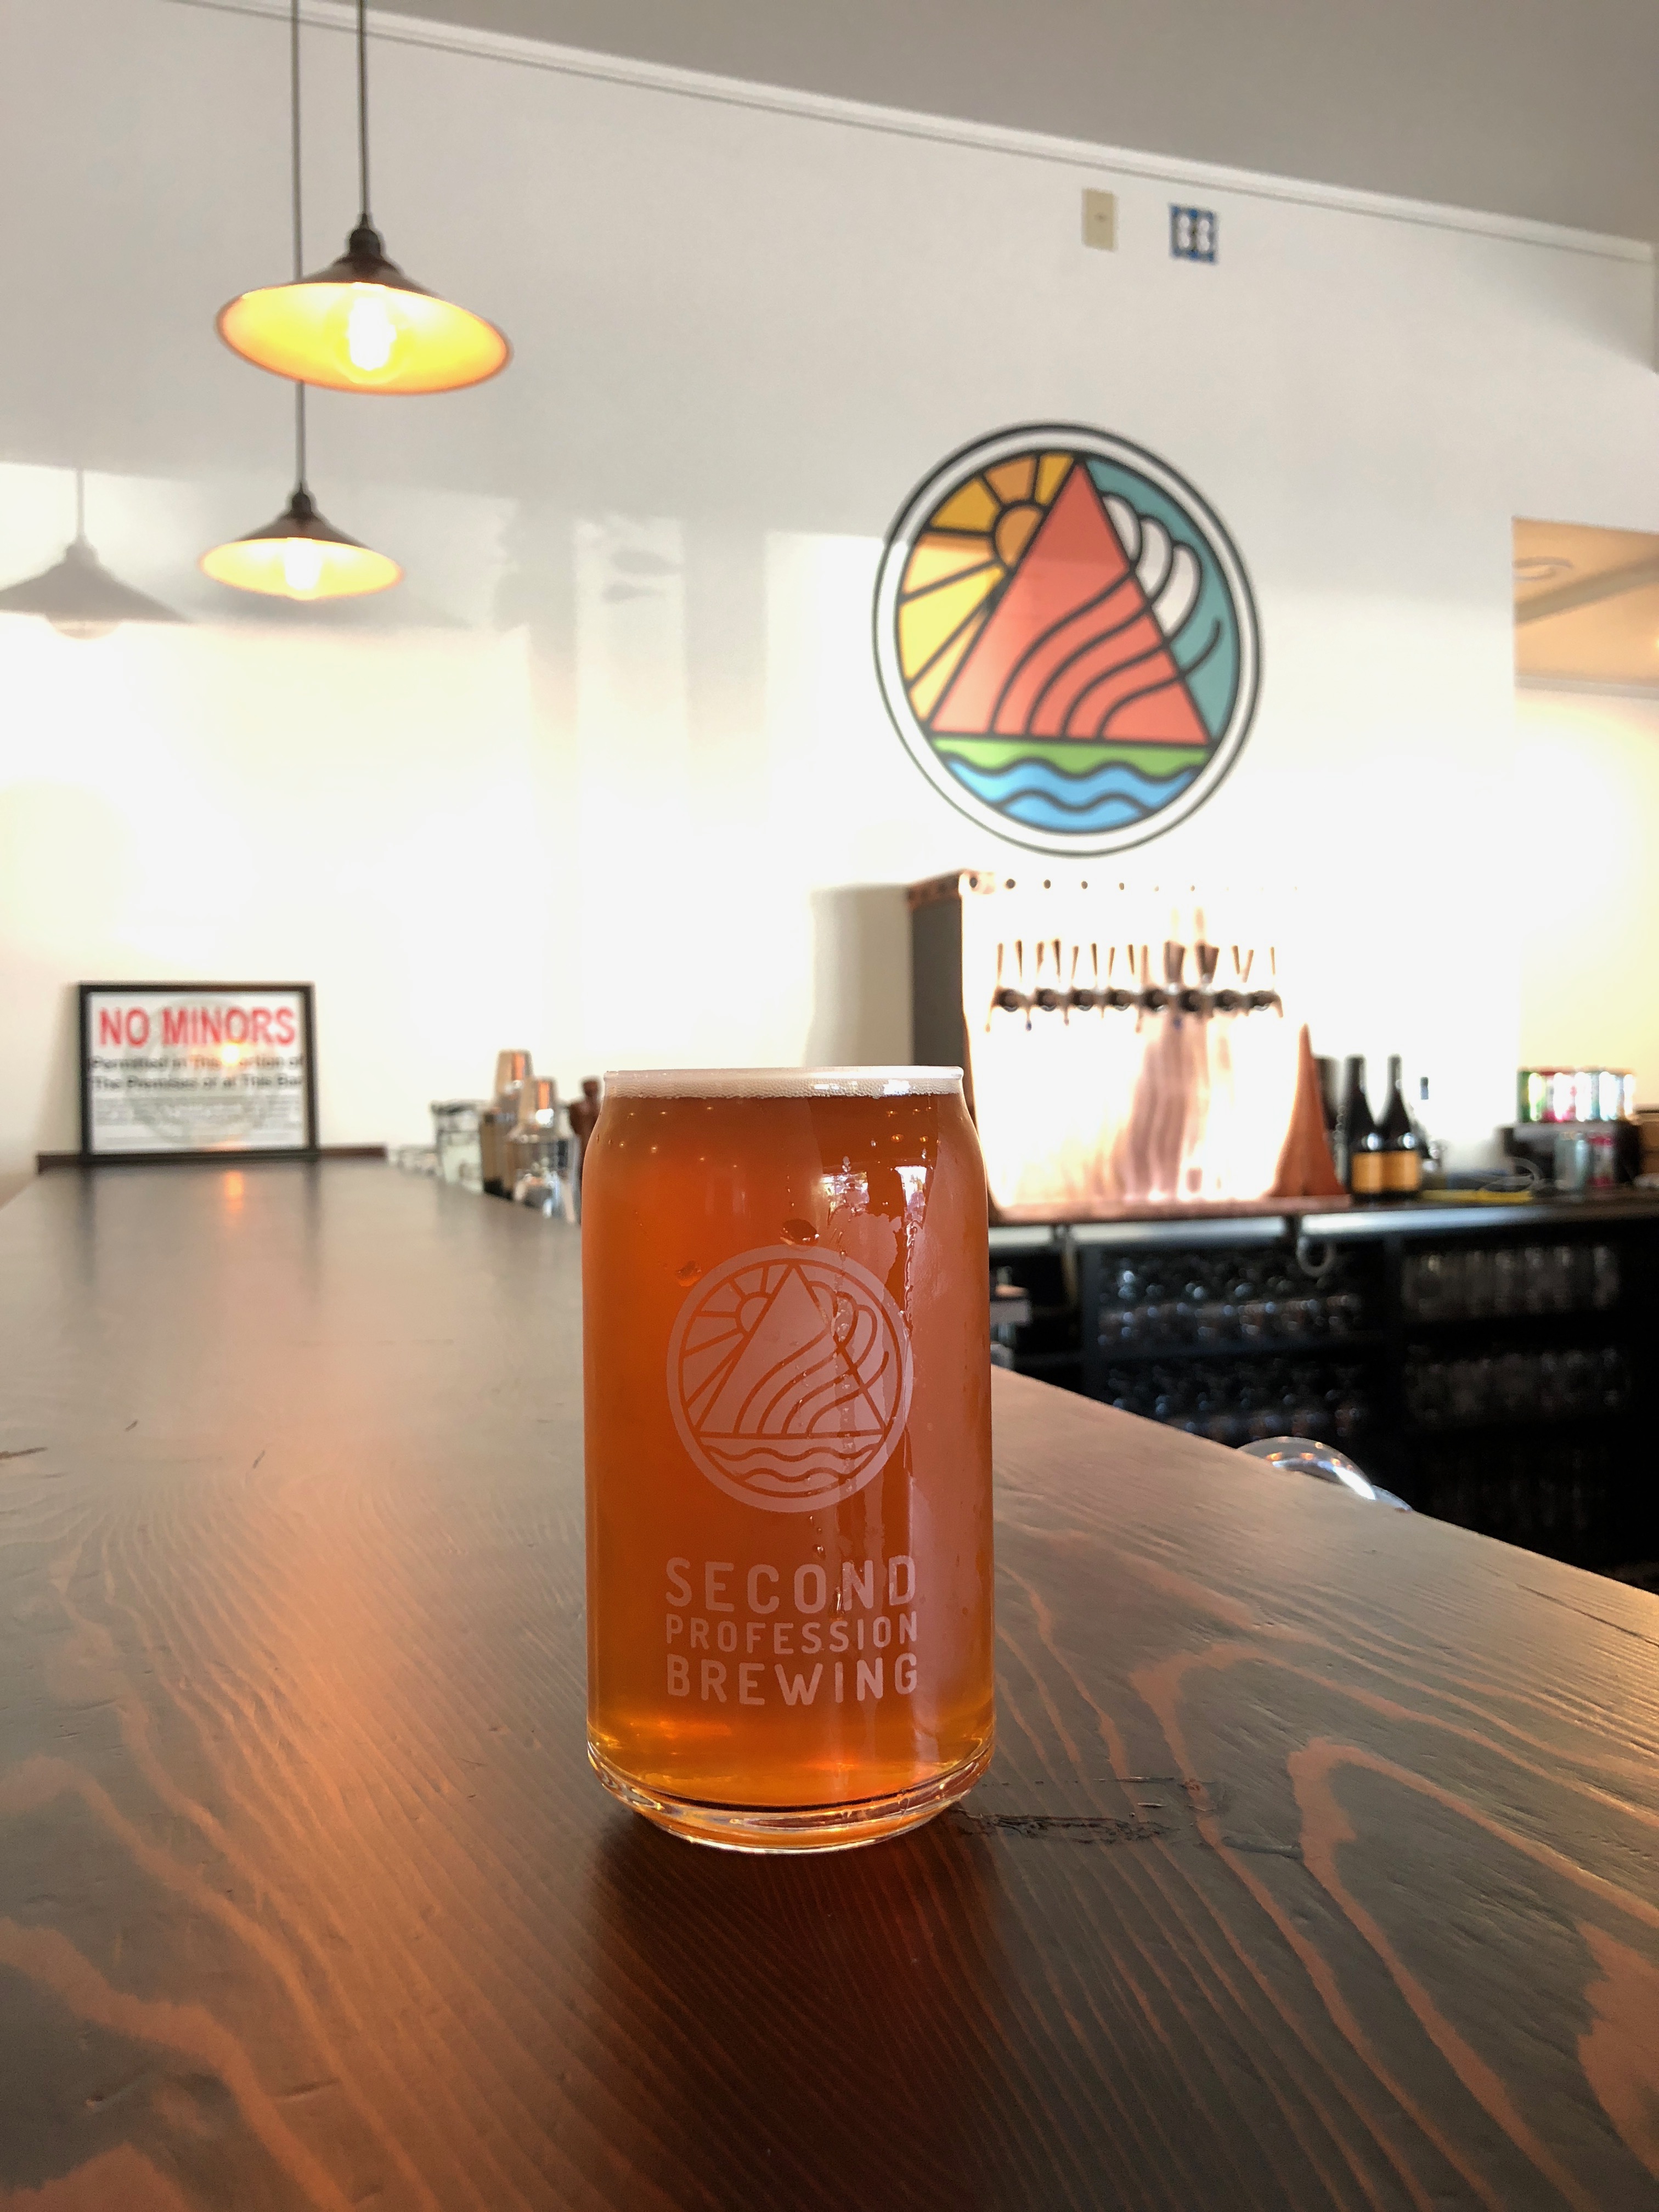 Second Profession Brewing opened in the former spot that BTU once had.